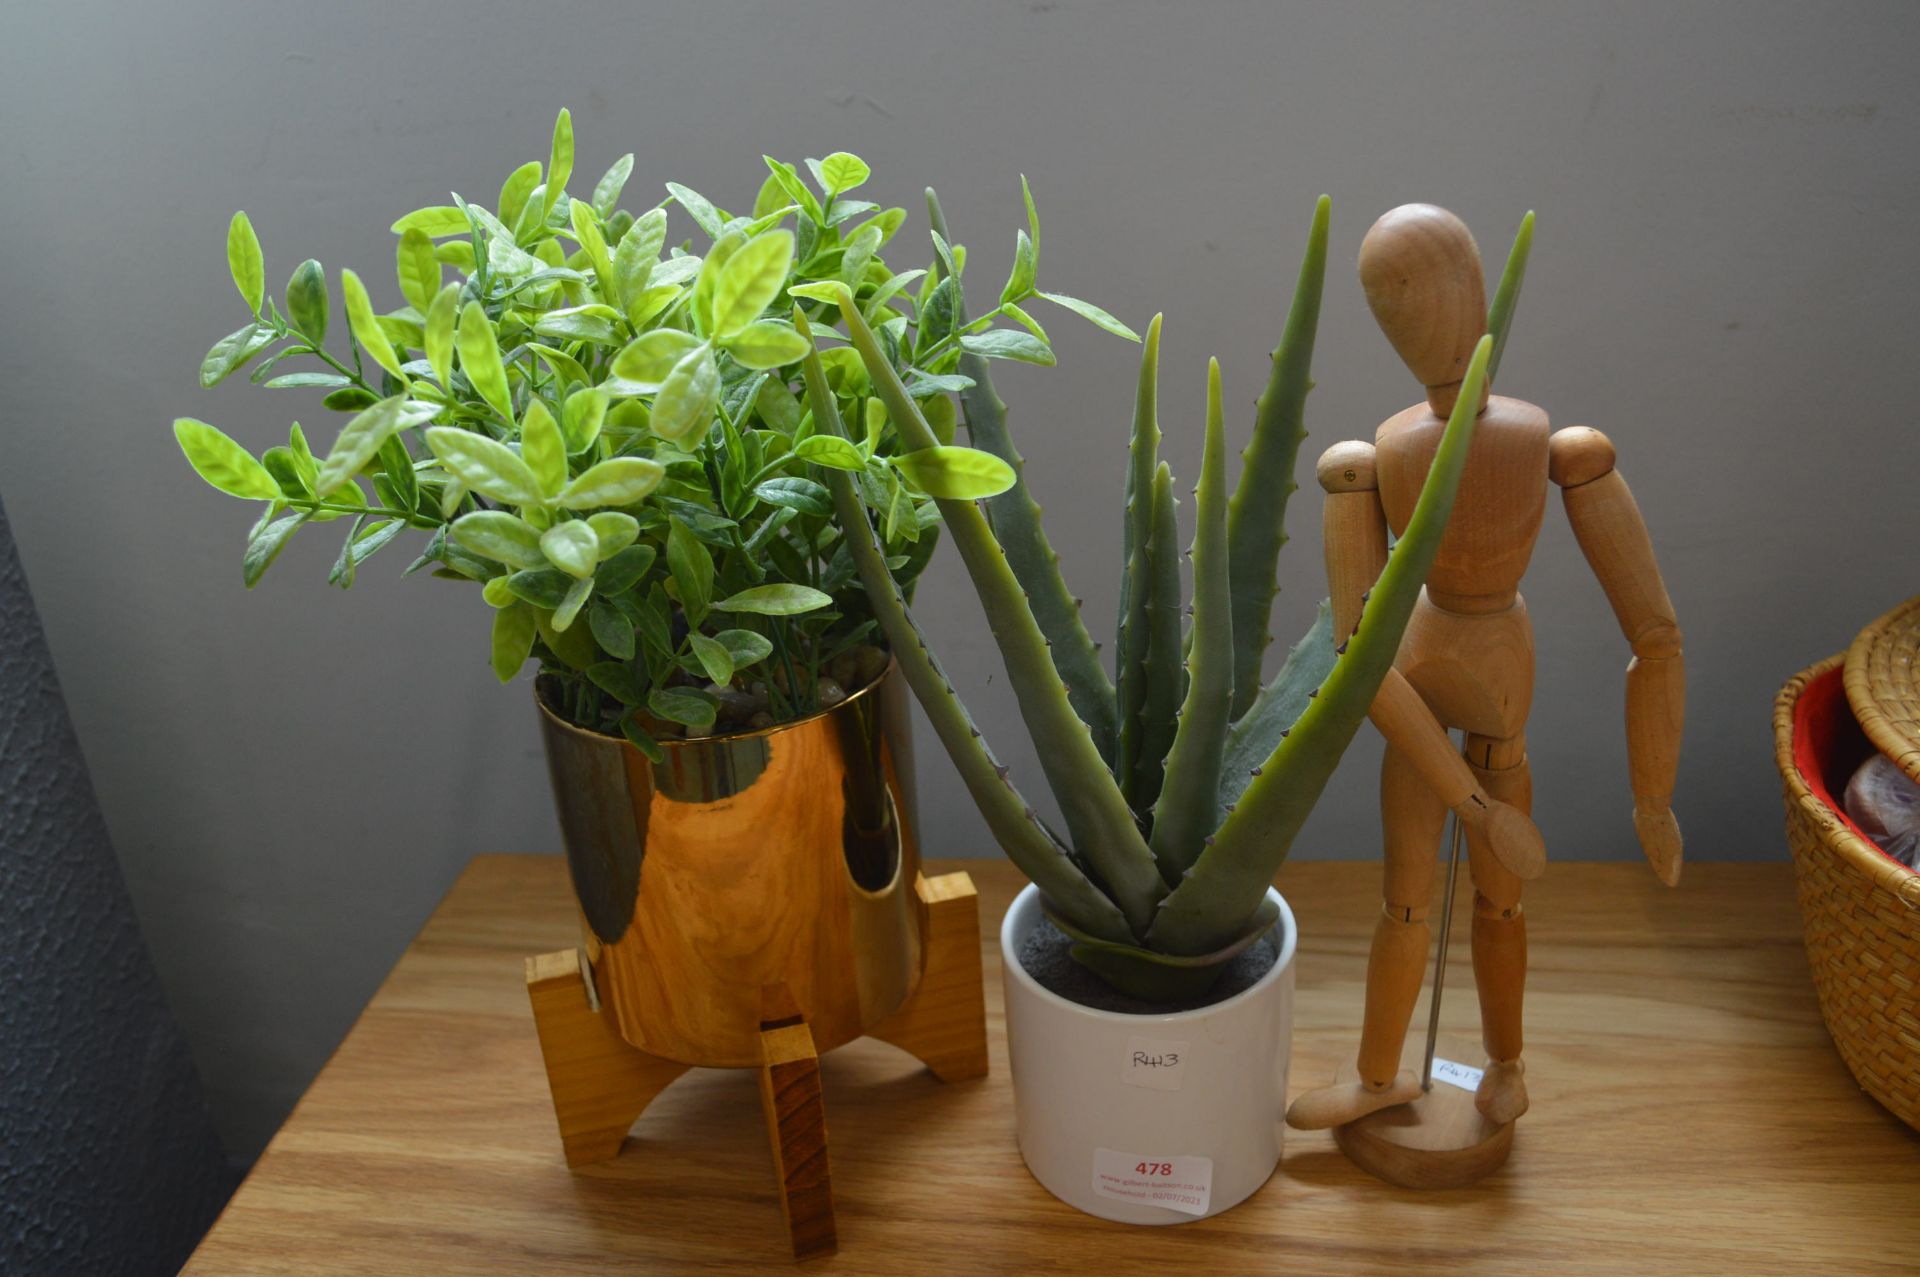 Artificial Cactus, House Plant, and a Wooden Manne